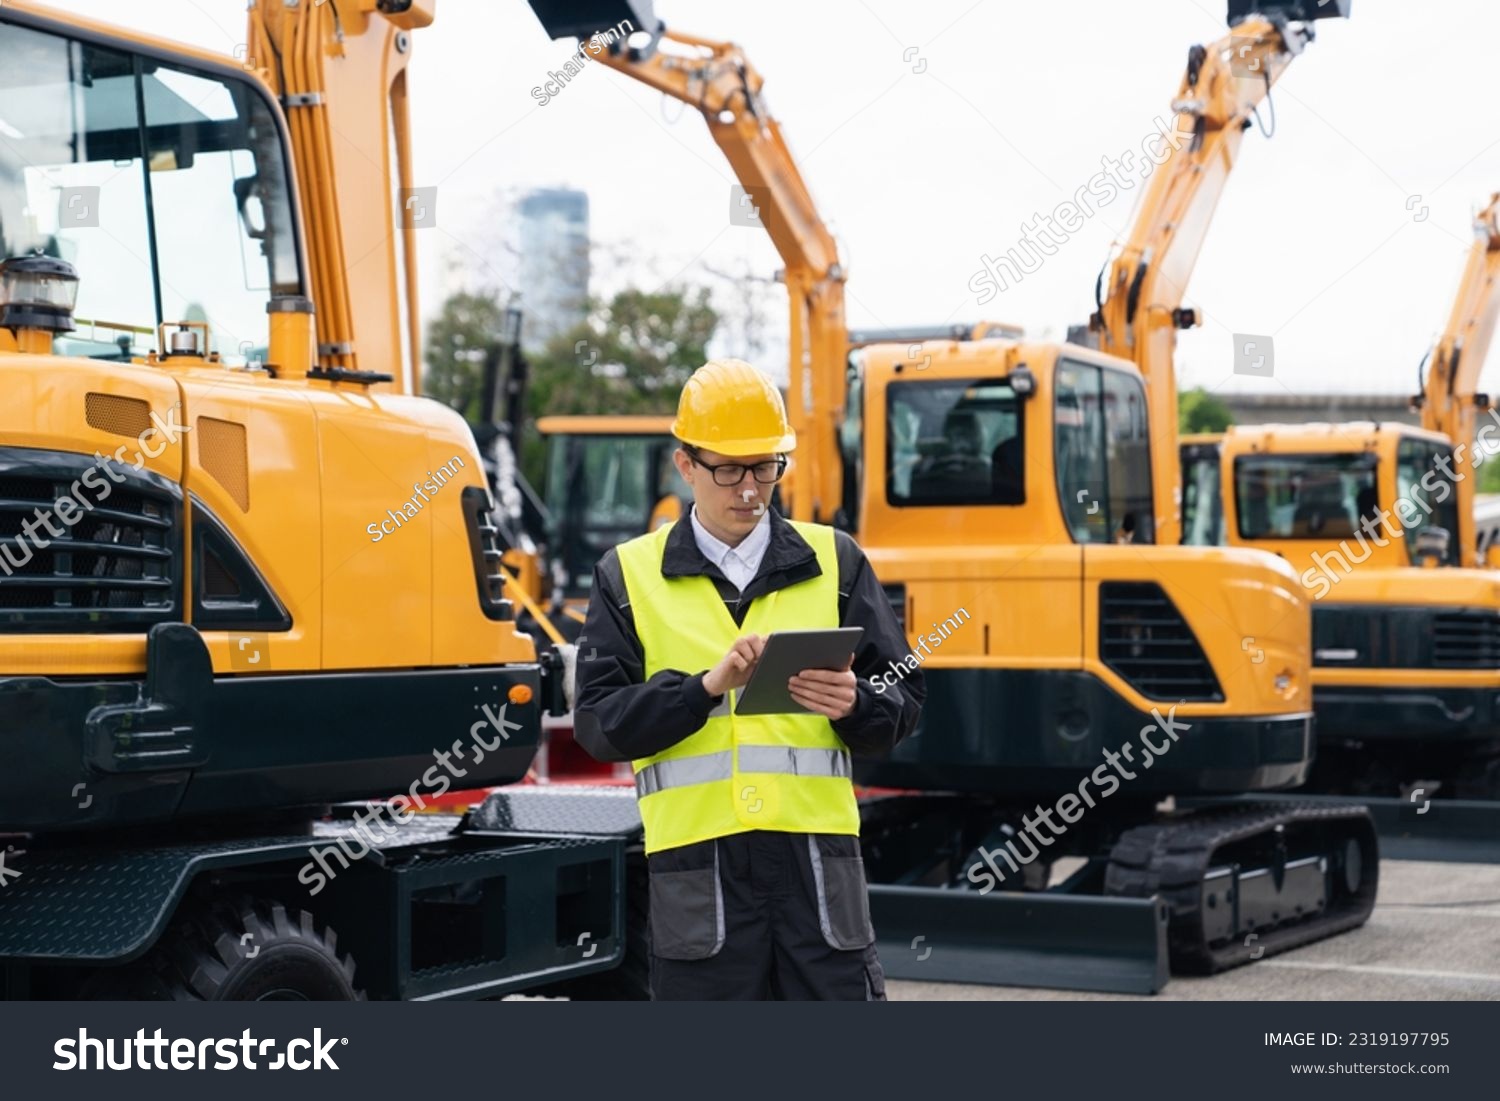 Engineer in a helmet with a digital tablet stands next to construction excavators	 #2319197795